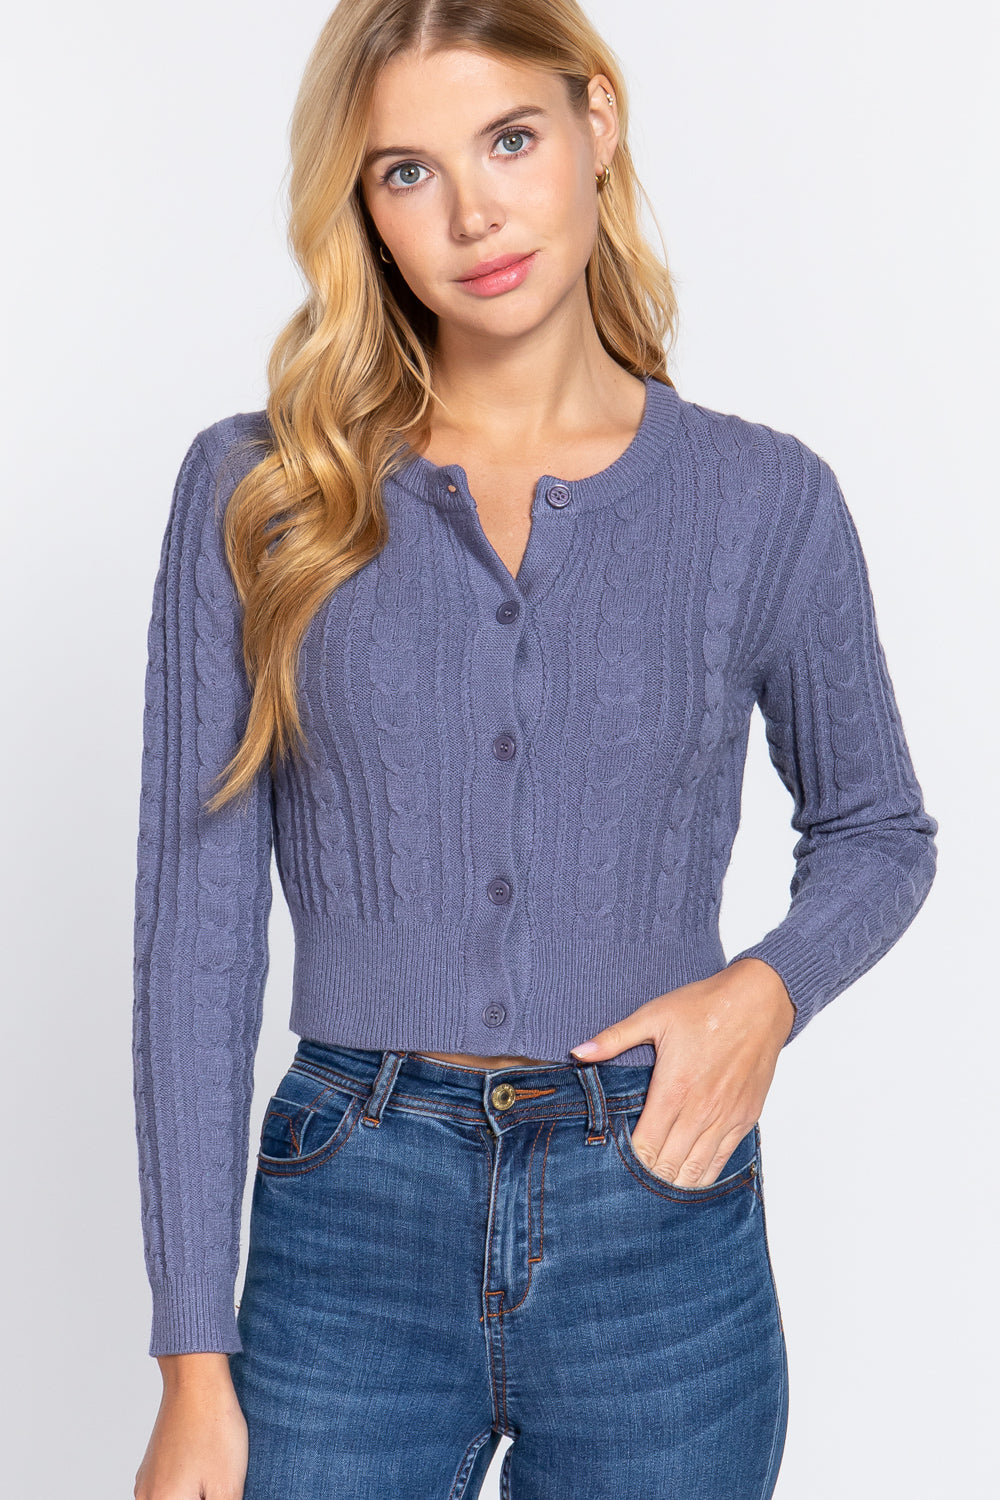 Gloomy Blue - Crew Neck Cable Sweater Cardigan - 4 colors - womens cardigan at TFC&H Co.